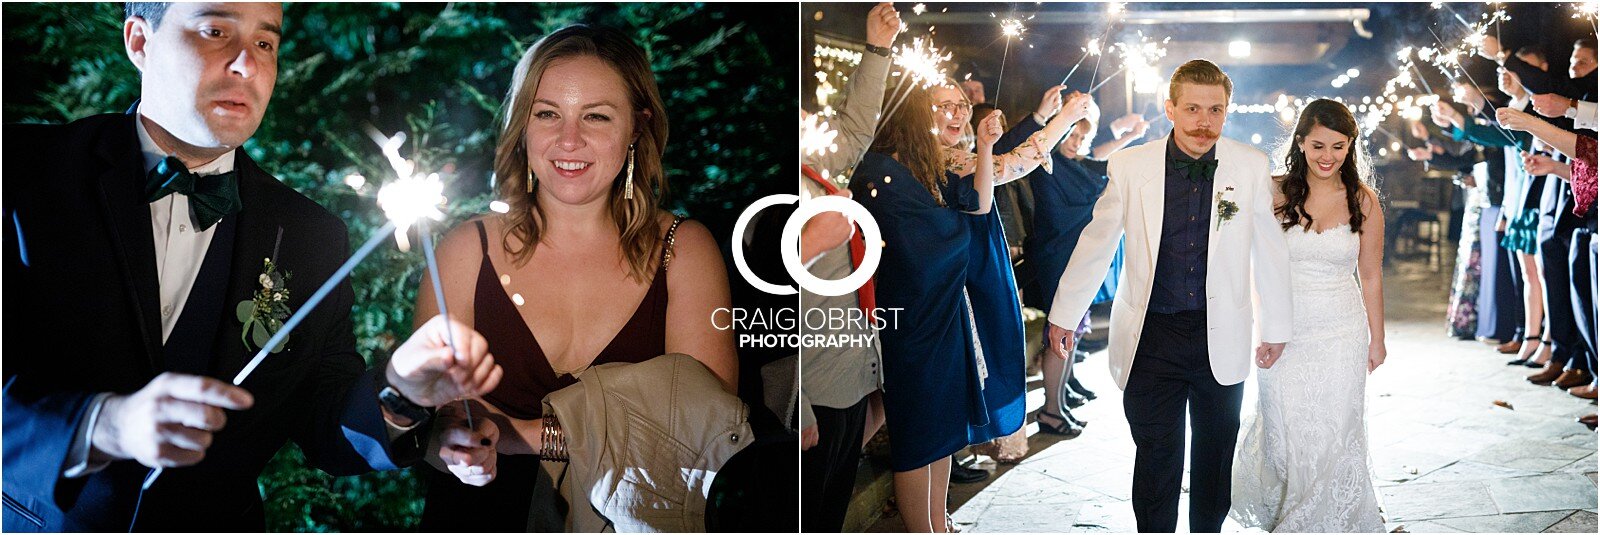 in the woods events wedding portraits sunset photographer_0121.jpg